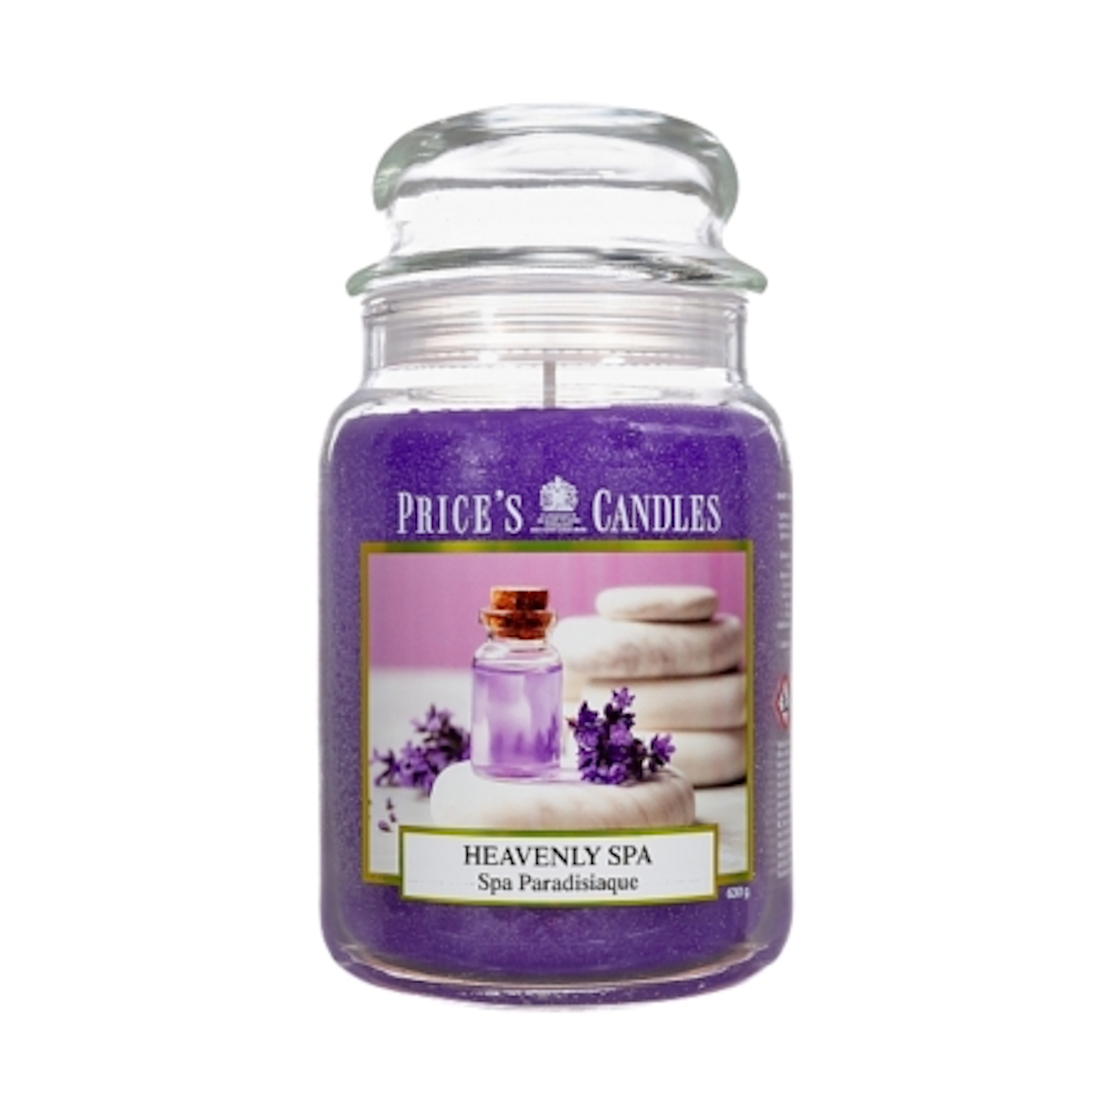 Prices Candles Heavenly Spa Large Jar